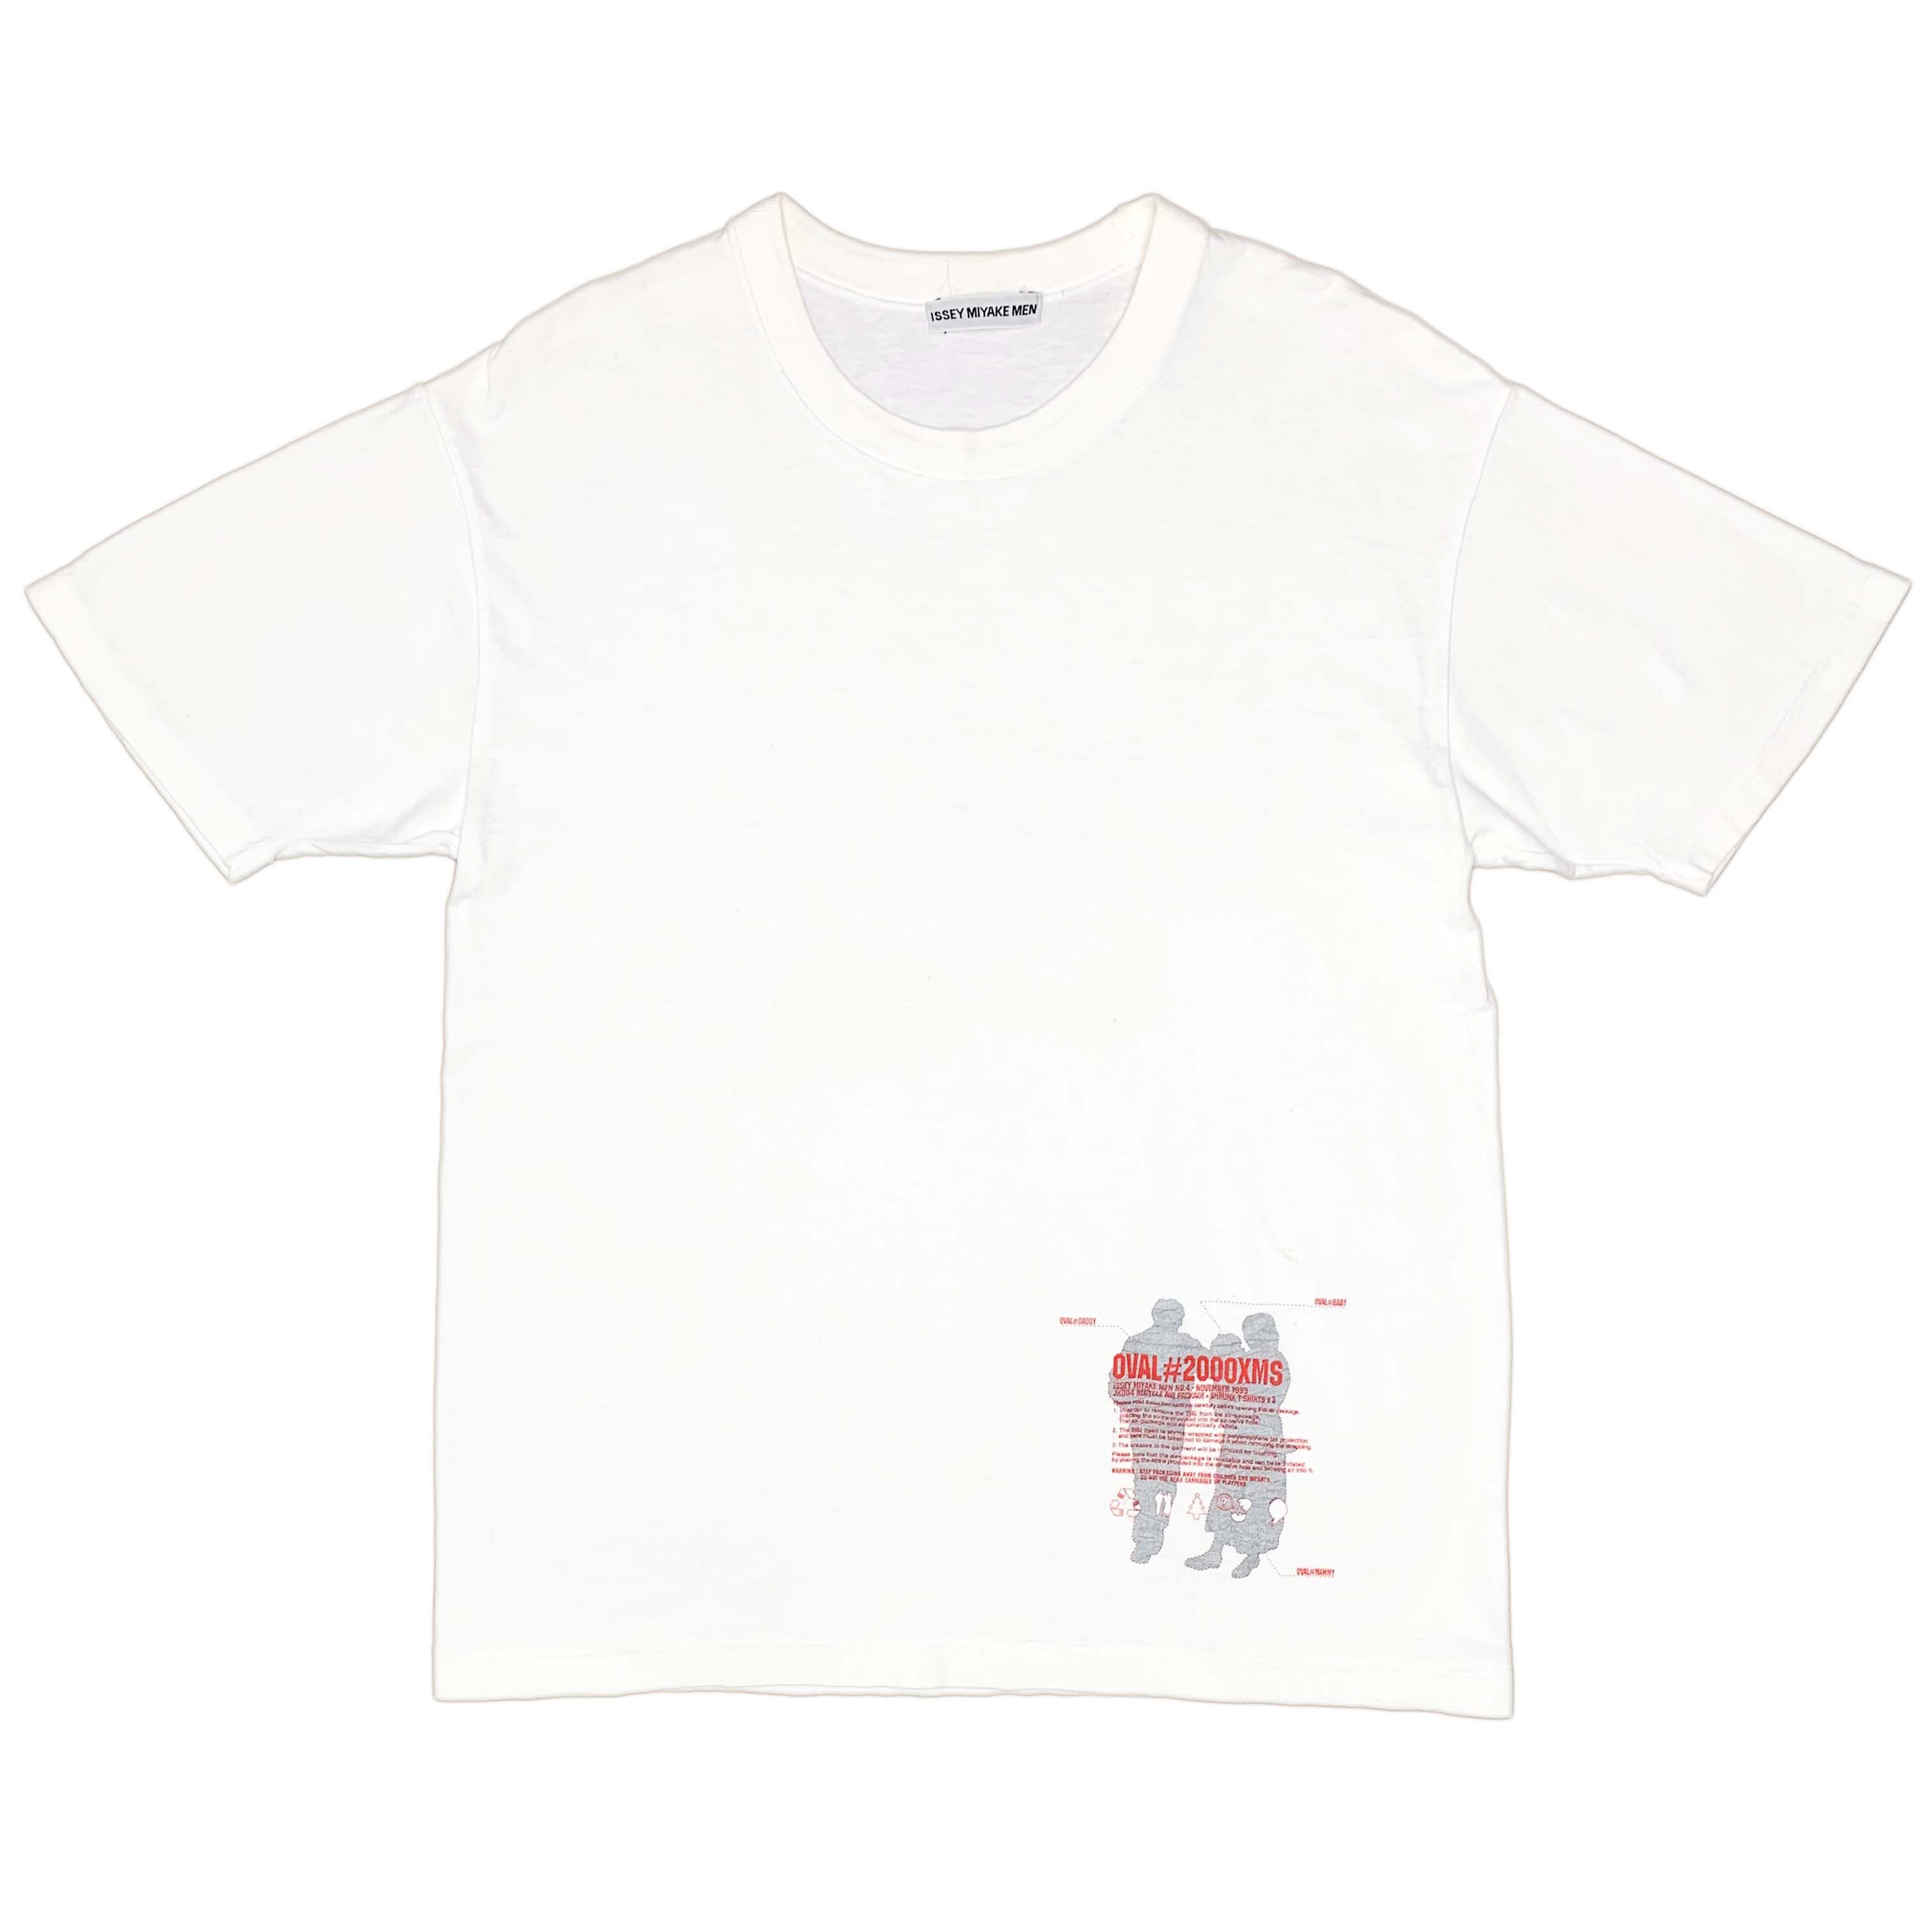 Issey Miyake - AW99 OVAL #2000XMS: Shrunk Cotton T-Shirt - 1